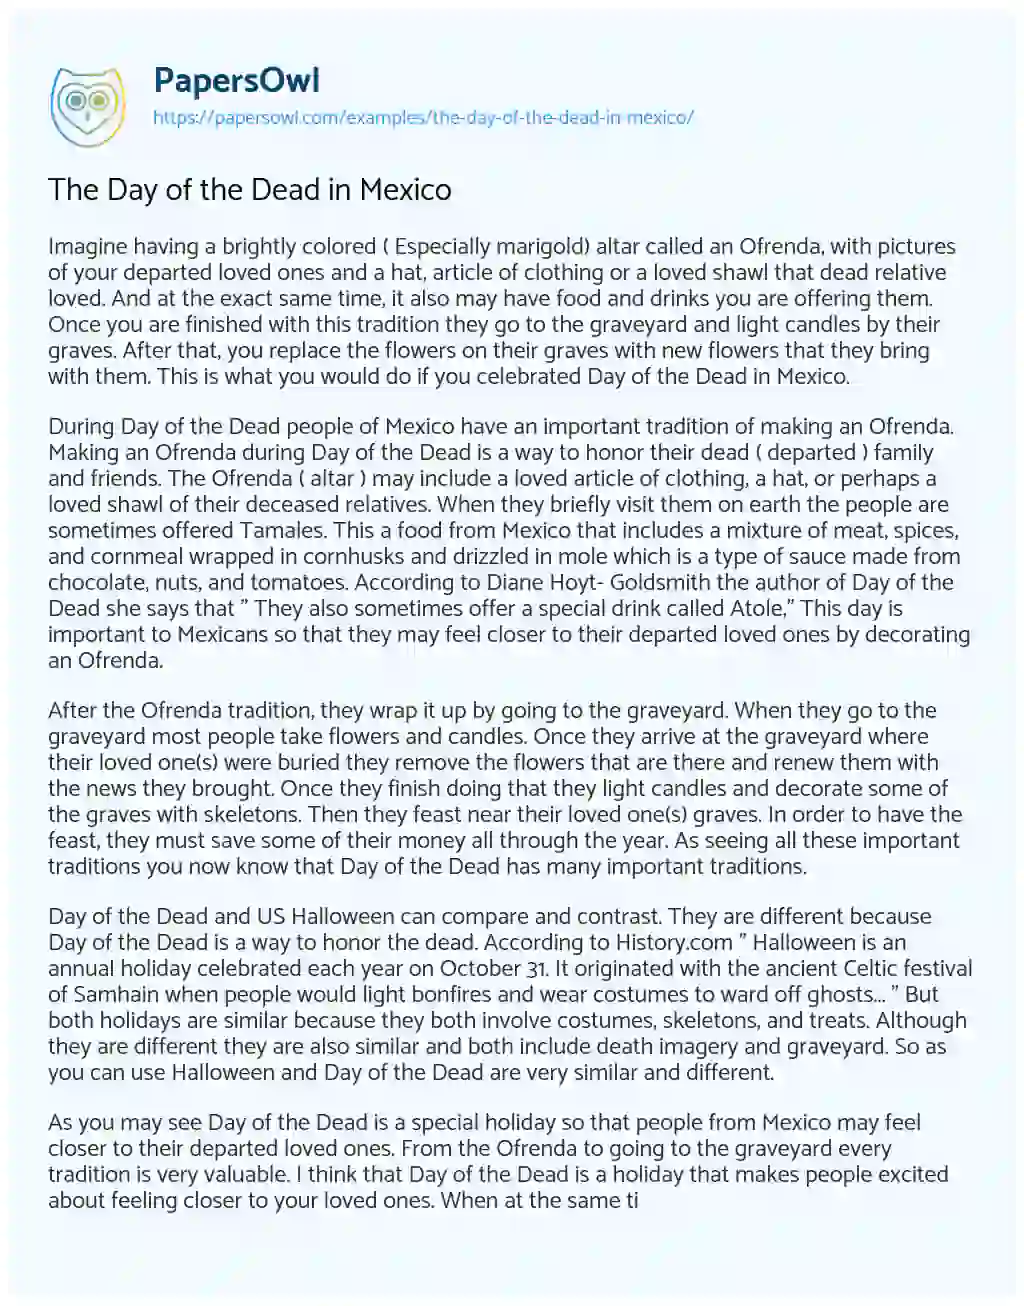 Essay on The Day of the Dead in Mexico